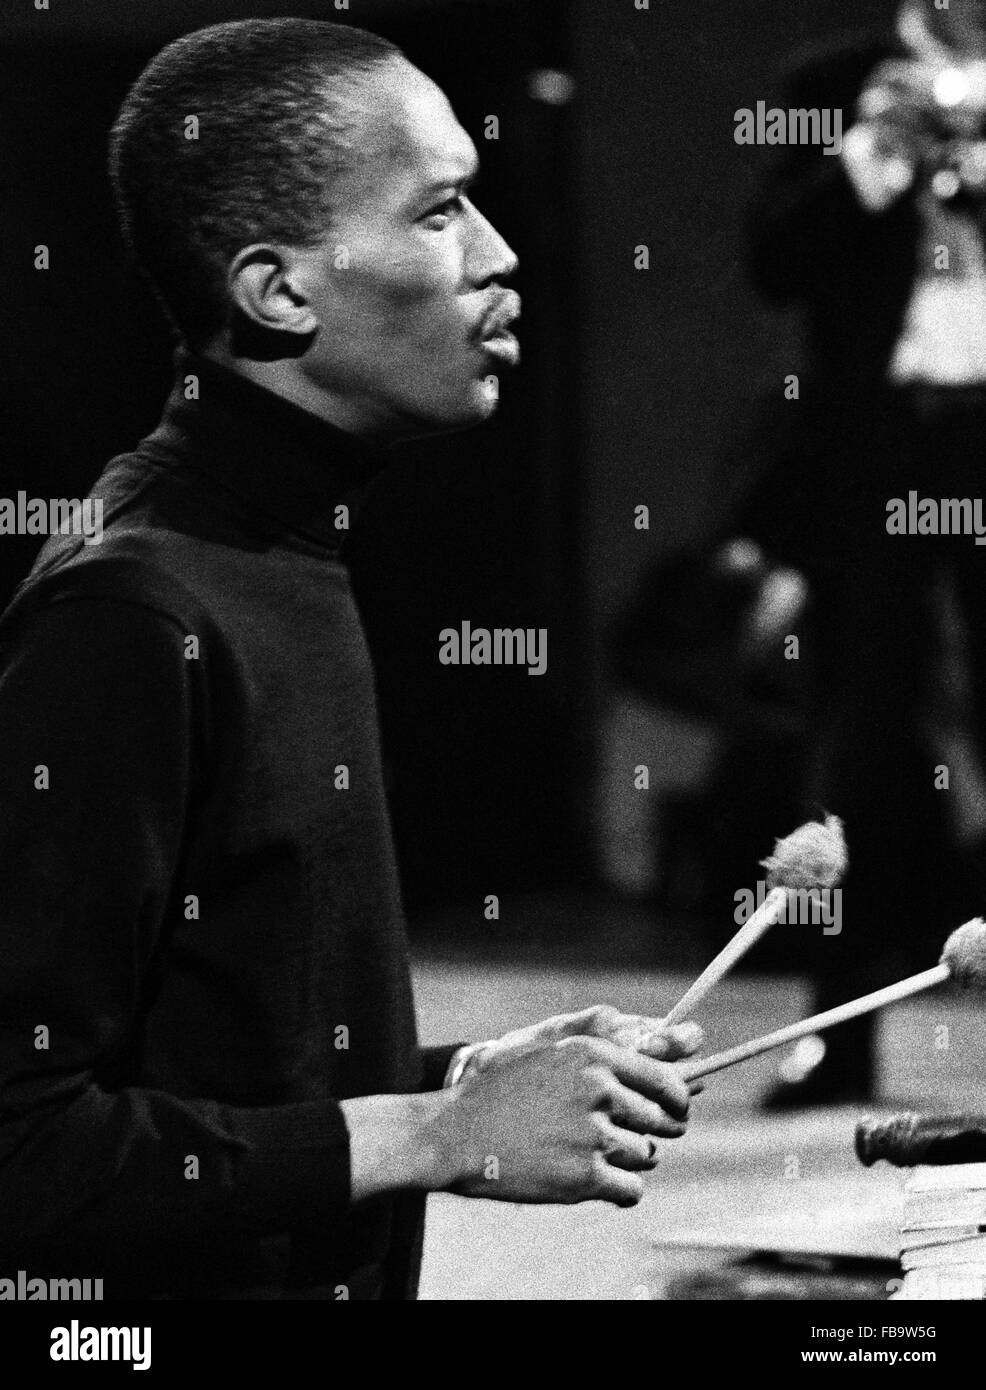 Don CHERRY on-stage. -  1968  -  Germany  -  Don CHERRY on-stage. -  Don CHERRY ; - Berlin ; - 1968 ;  - Credit :   ;   -  Philippe Gras / Le Pictorium Stock Photo